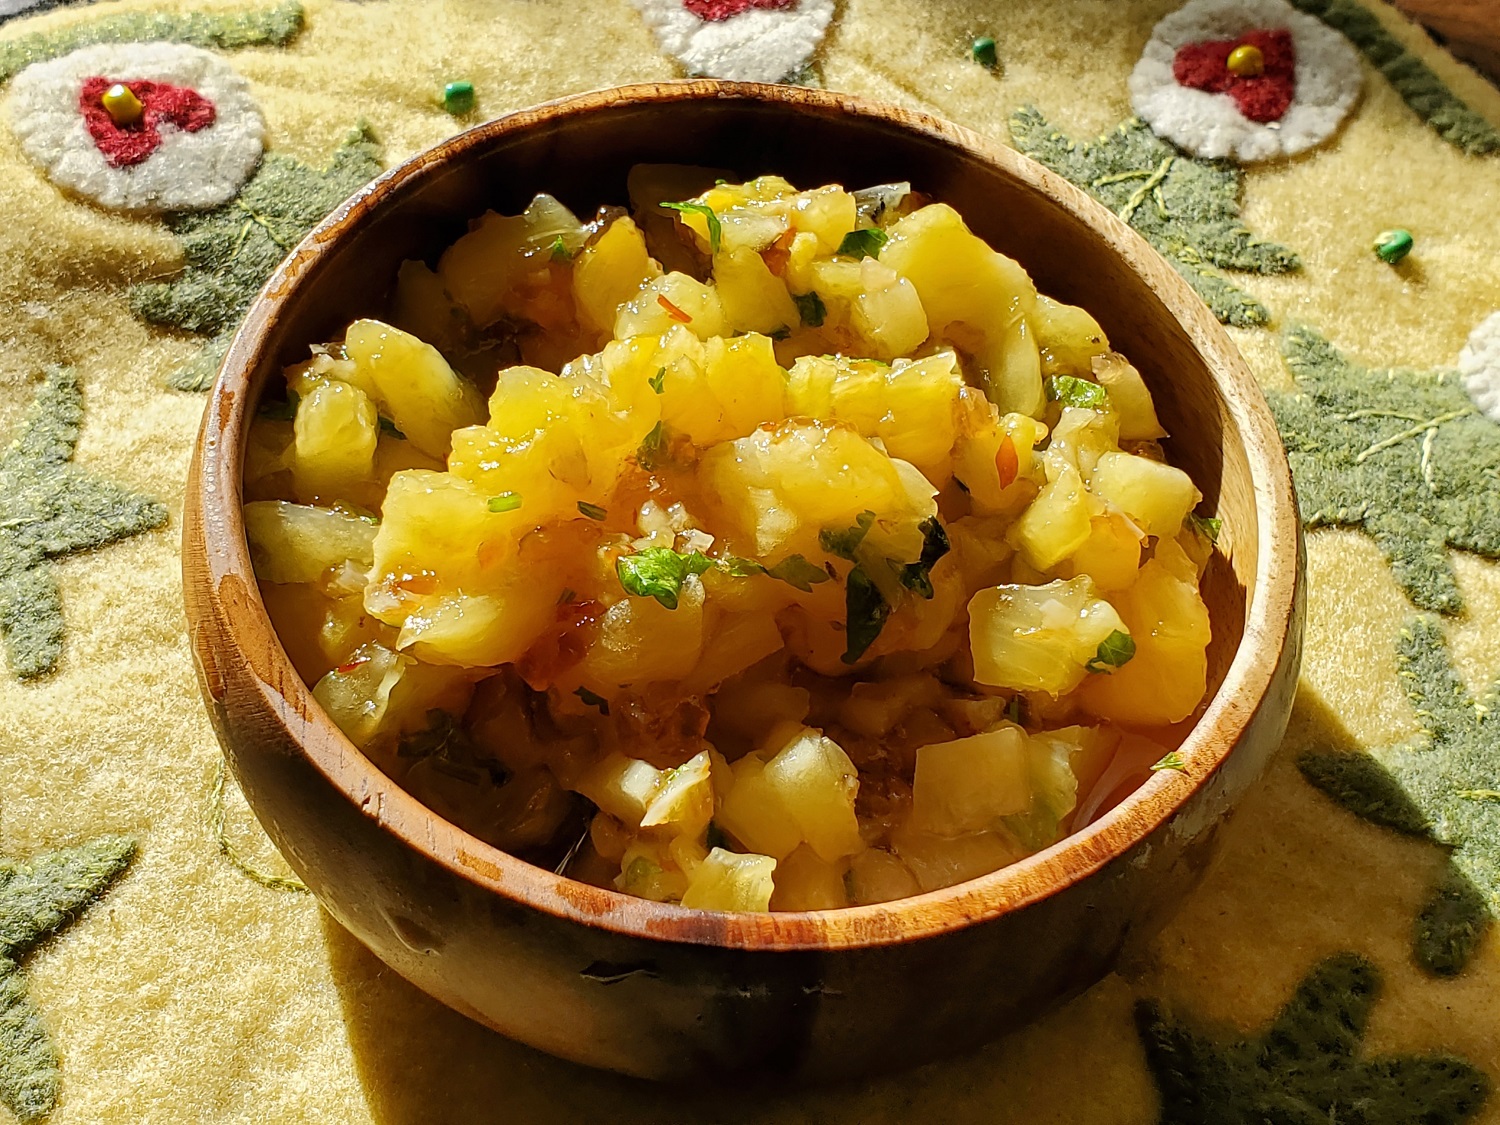 Fresh Pineapple Salsa from the Polynesian Cultural Center